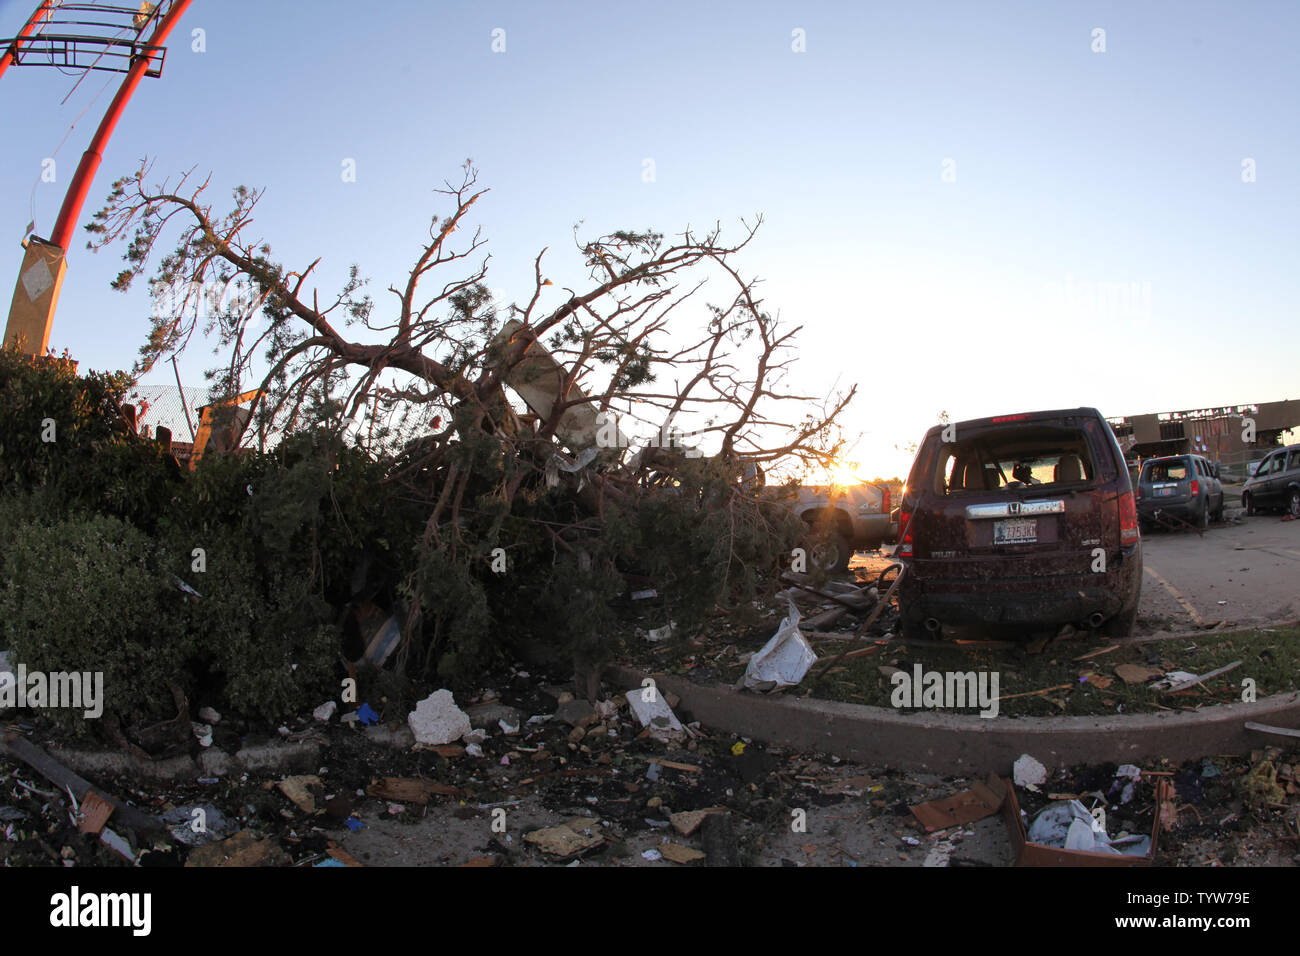 Destruction from the May 20 tornado that hit Moore, Oklahoma is seen on May 22, 2013. The EF-5 tornado cut a path of destruction approximately 17 miles by 1.3 miles wide and left 24 people dead.  UPI/J.P. Wilson Stock Photo